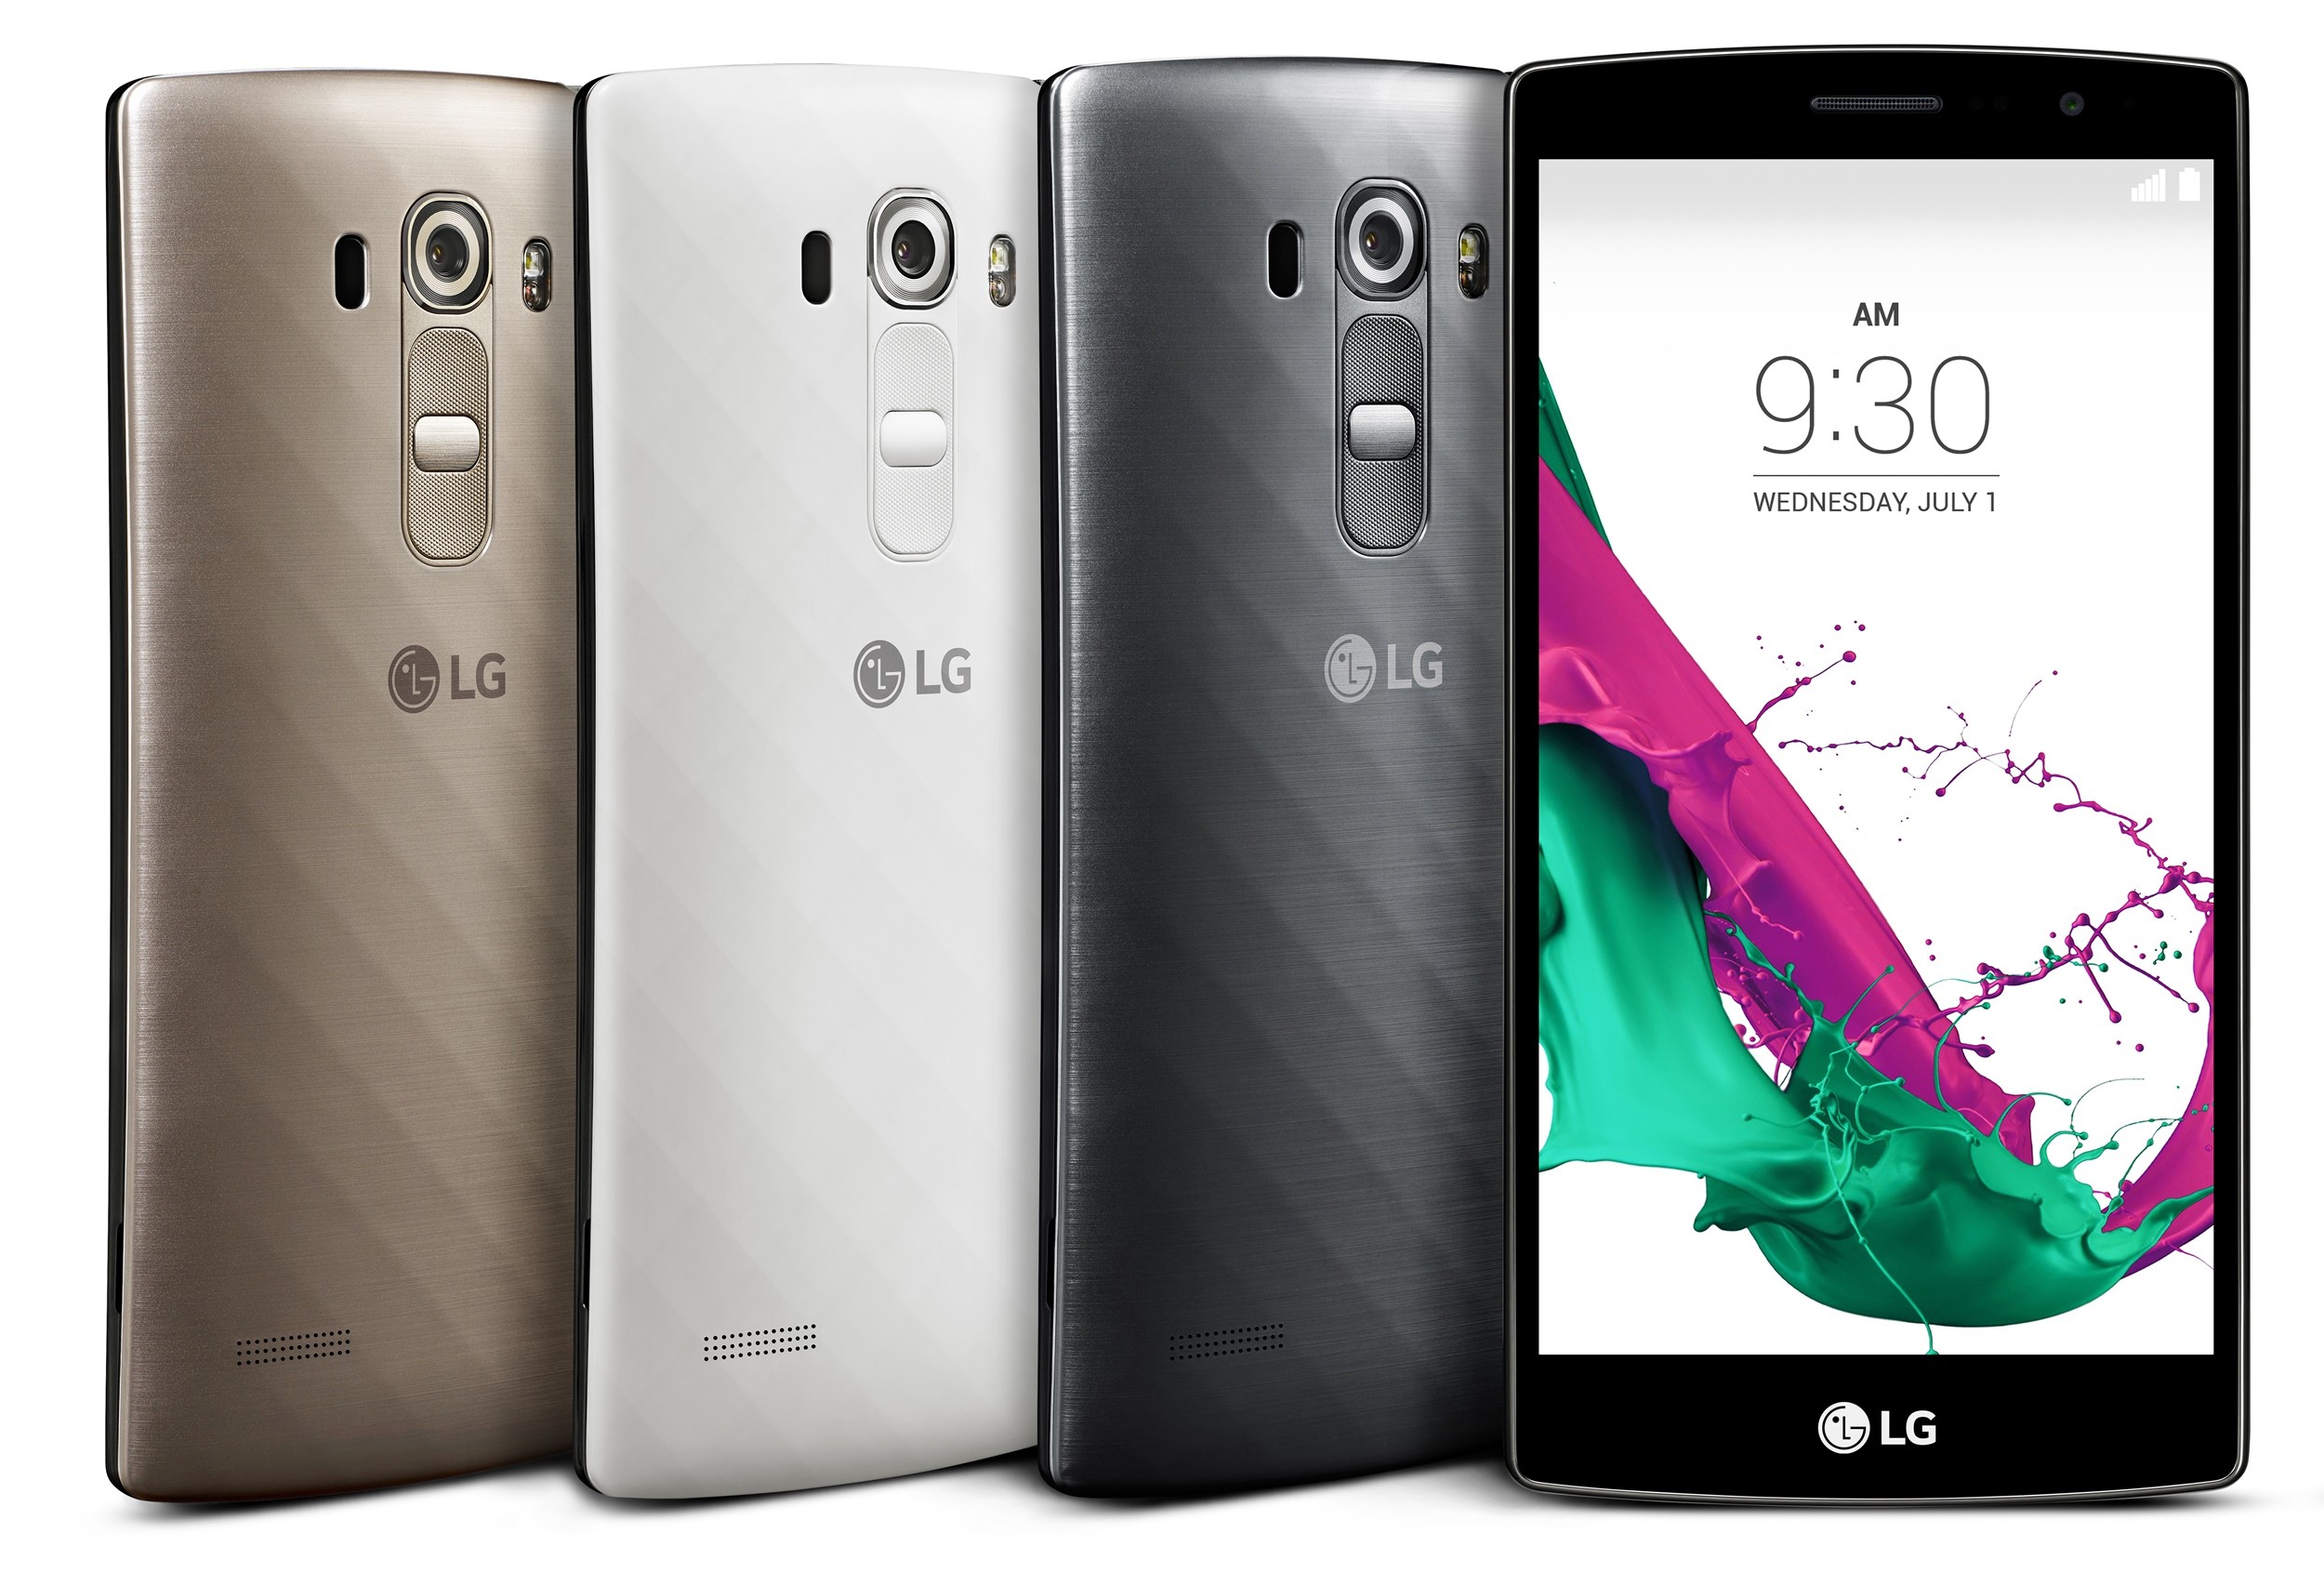 LG G4 BEAT DELIVERS PREMIUM DESIGN, SUPERIOR FEATURES IN A MID-TIER